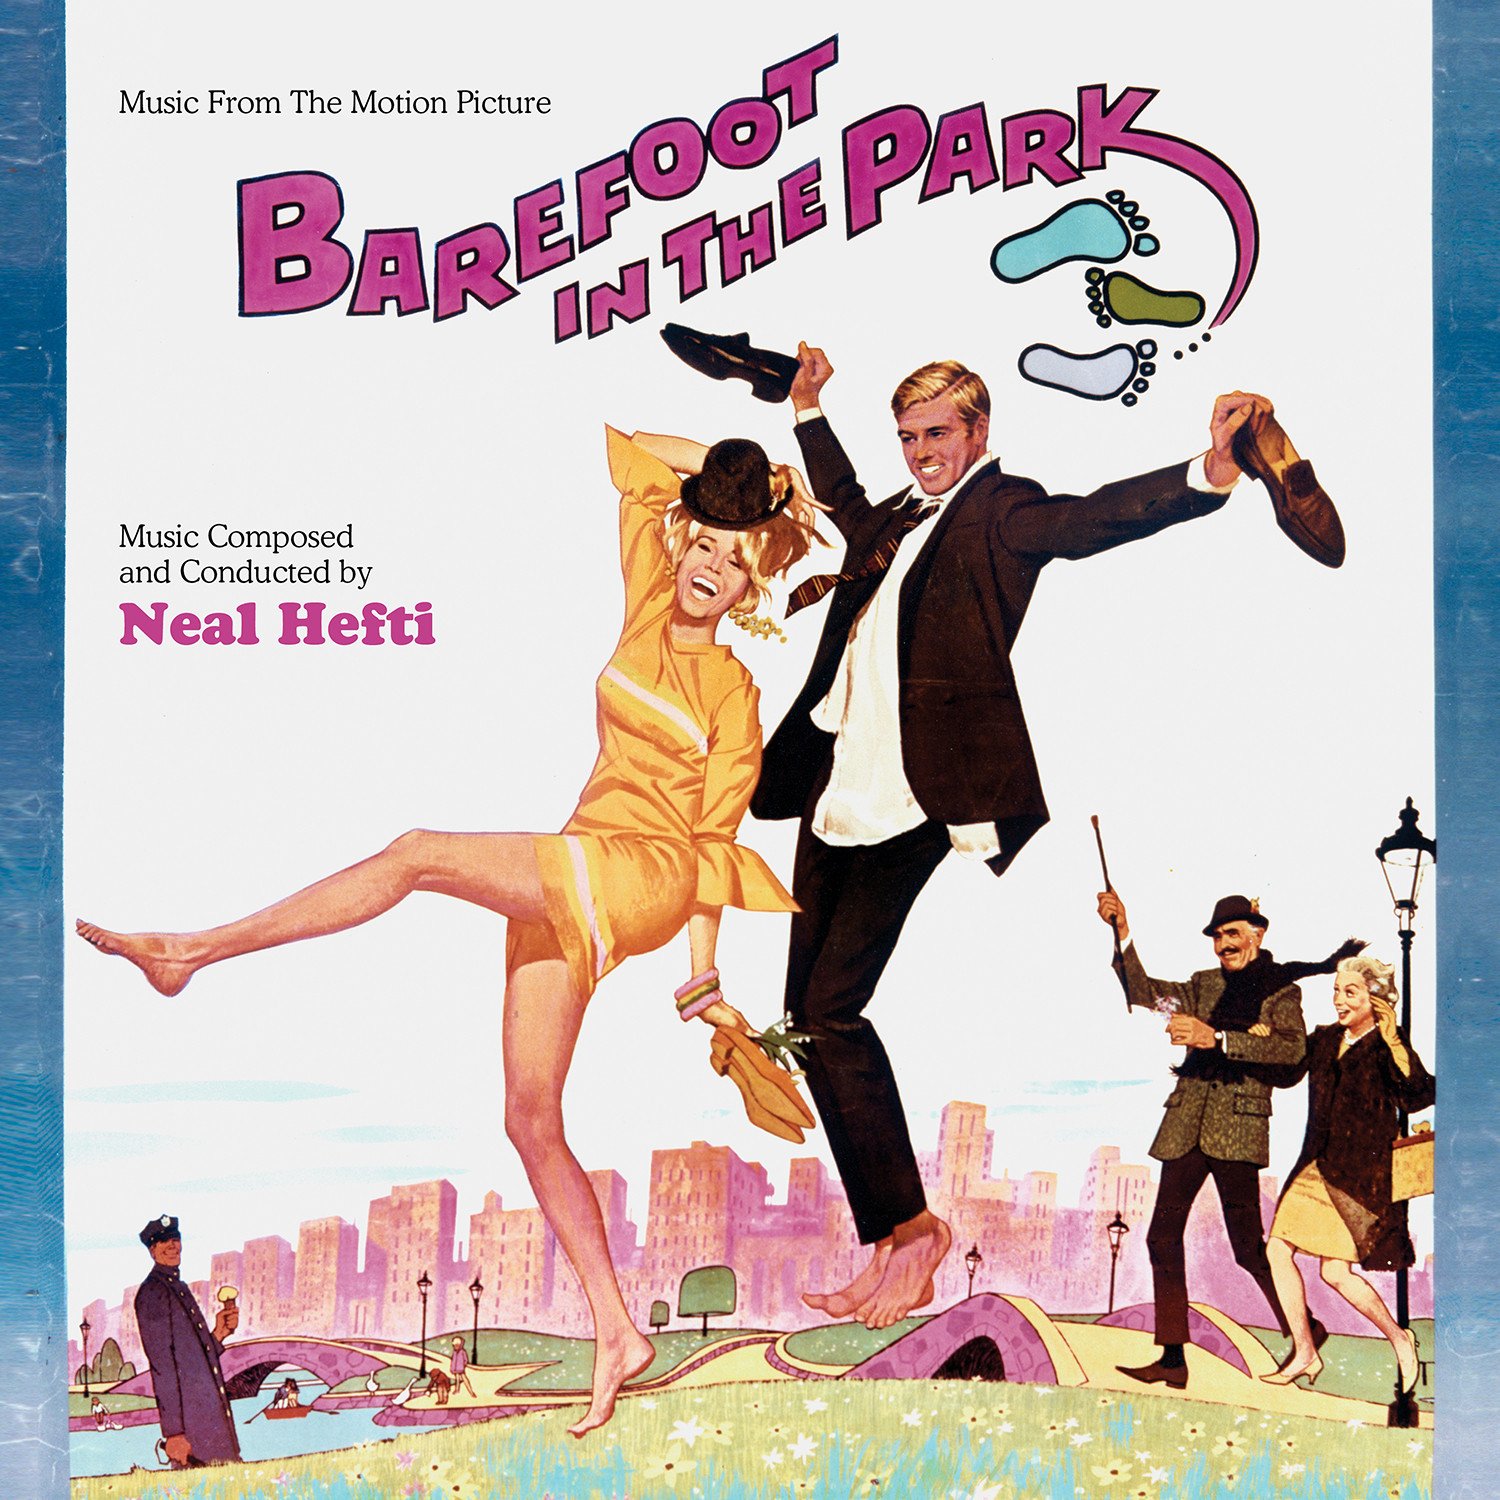 Barefoot In The Park and The Odd Couple